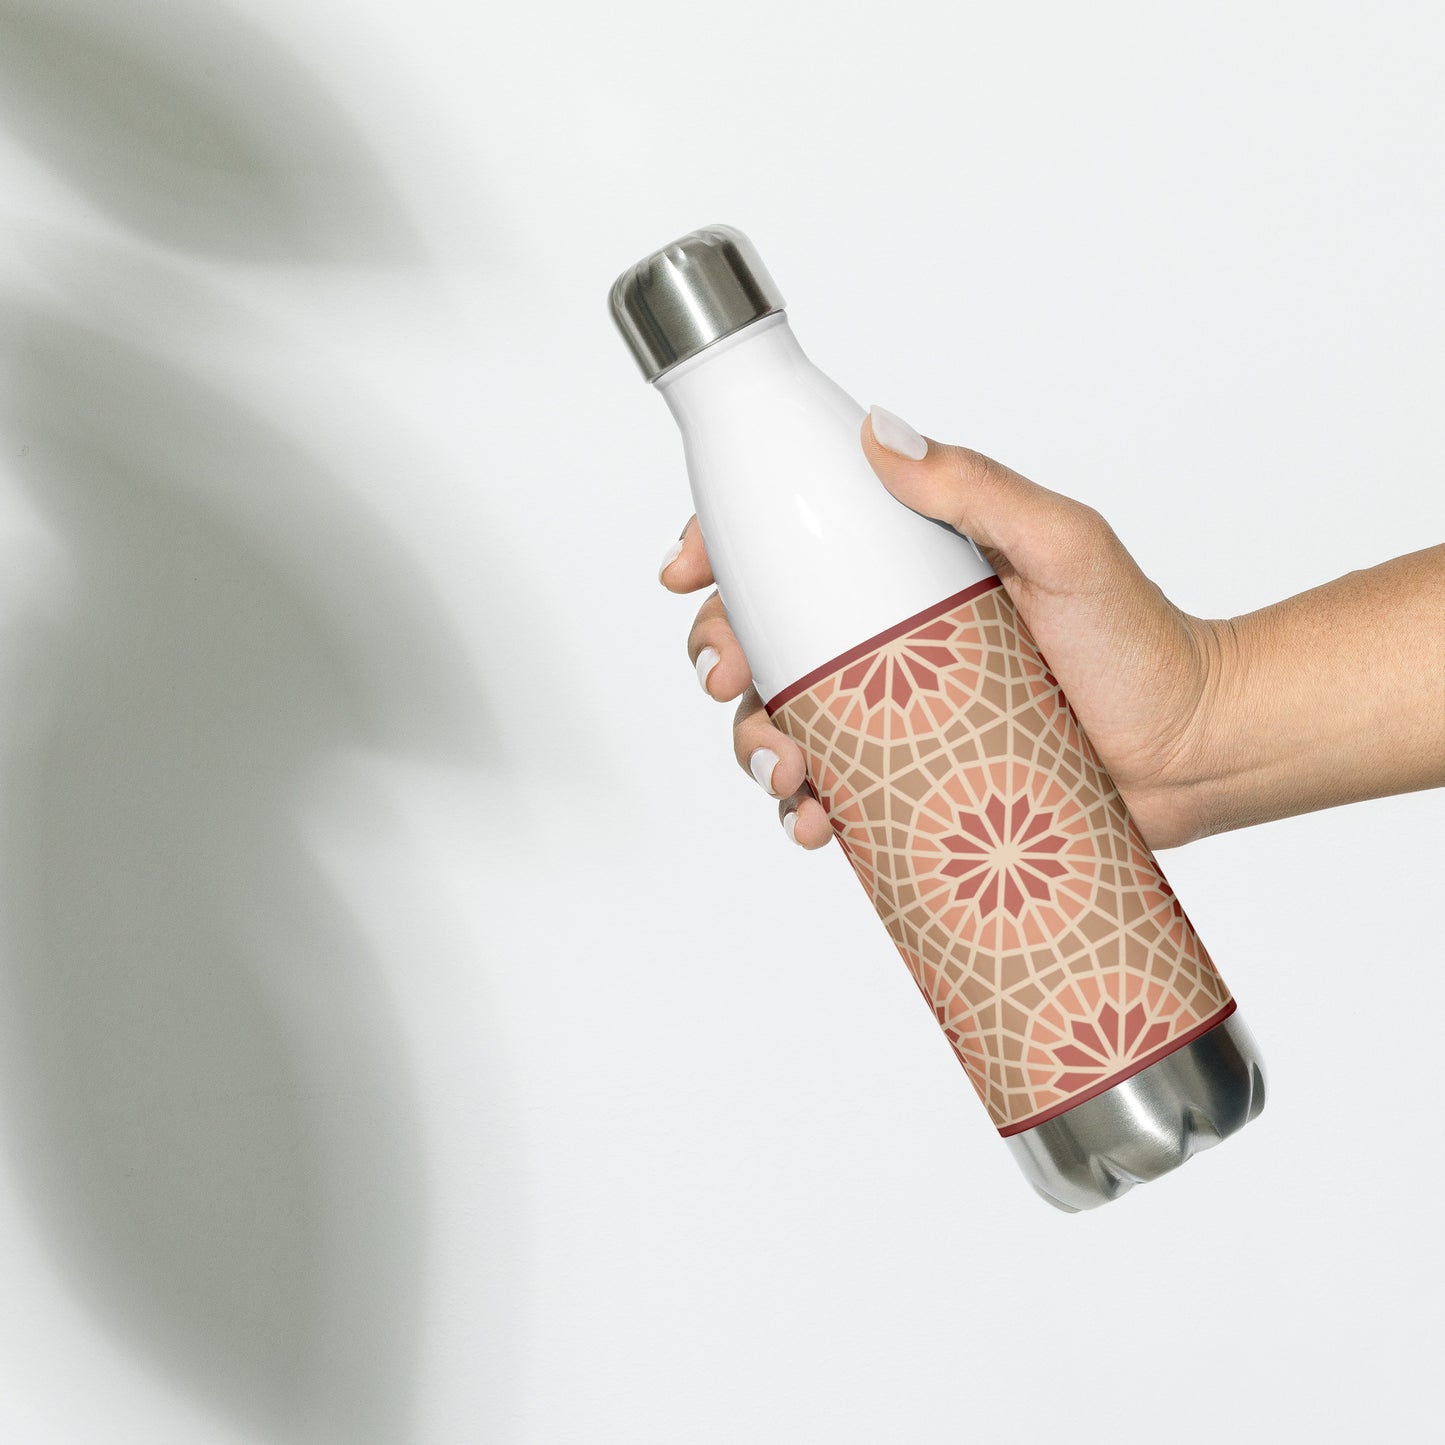 Stainless Steel Water Bottle - Geometric Star in Cocoa and Cream